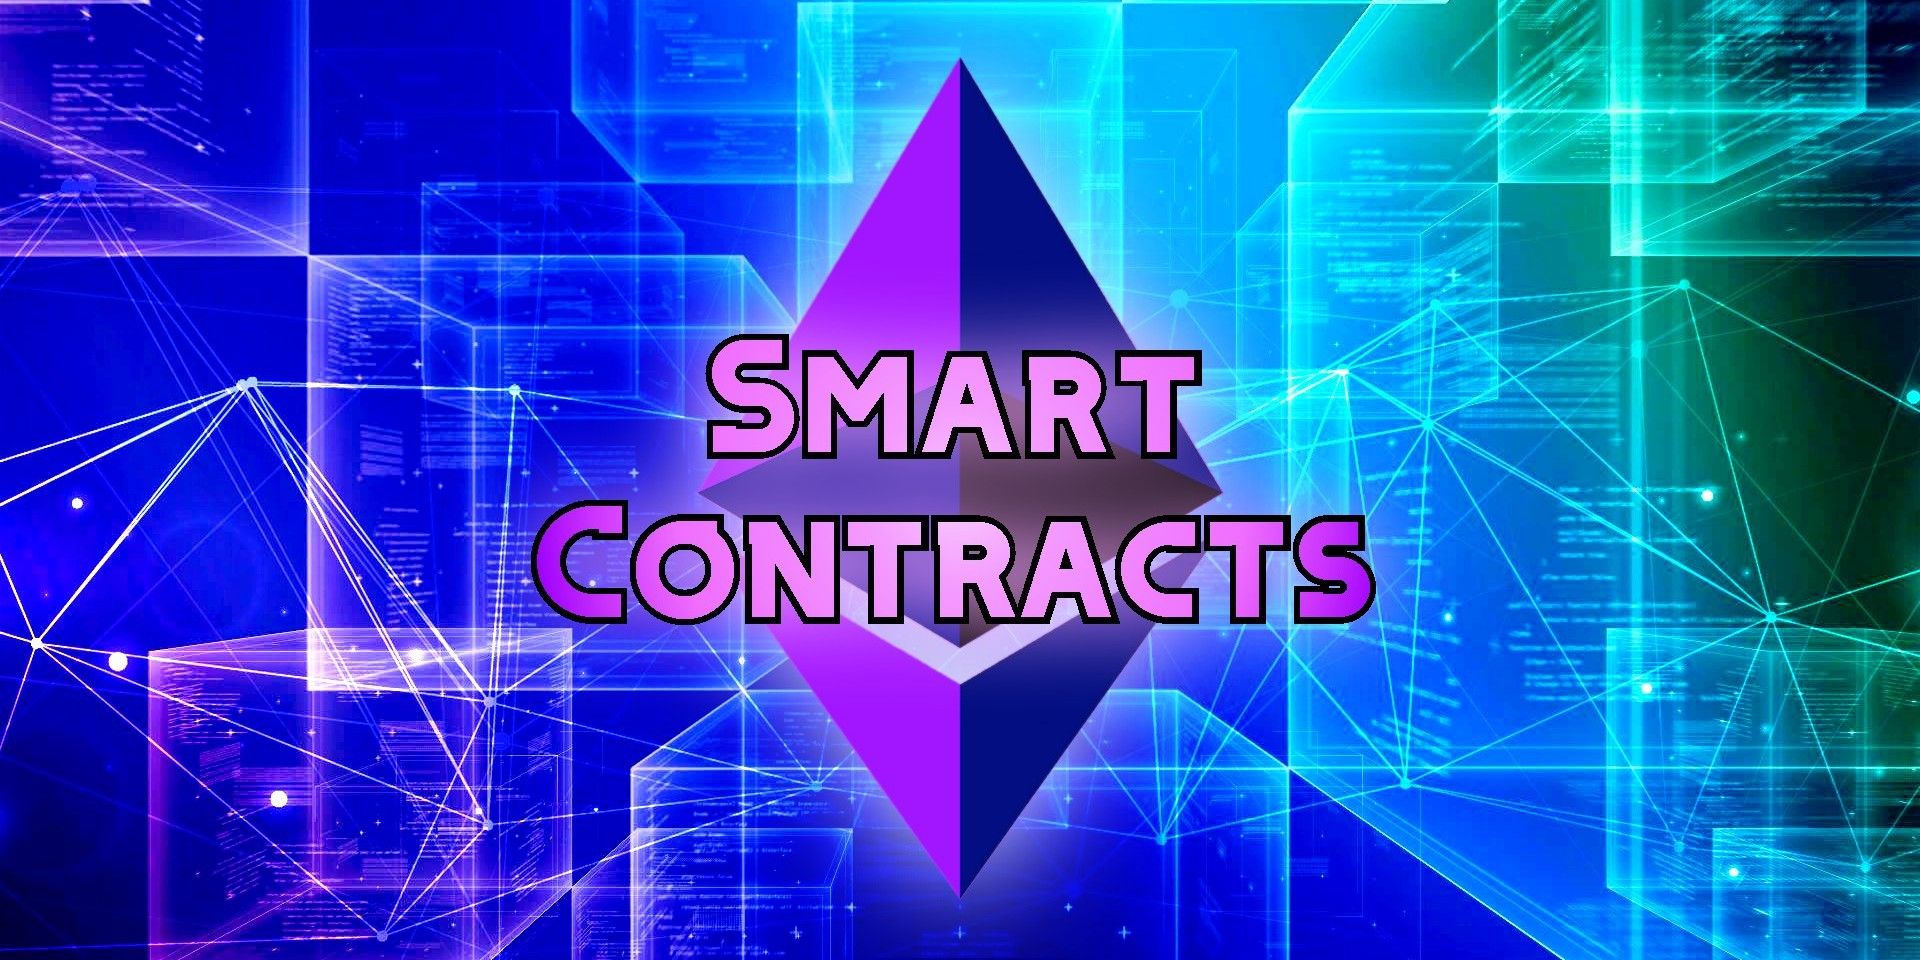 Smart Contracts text over Ethereum logo digital background